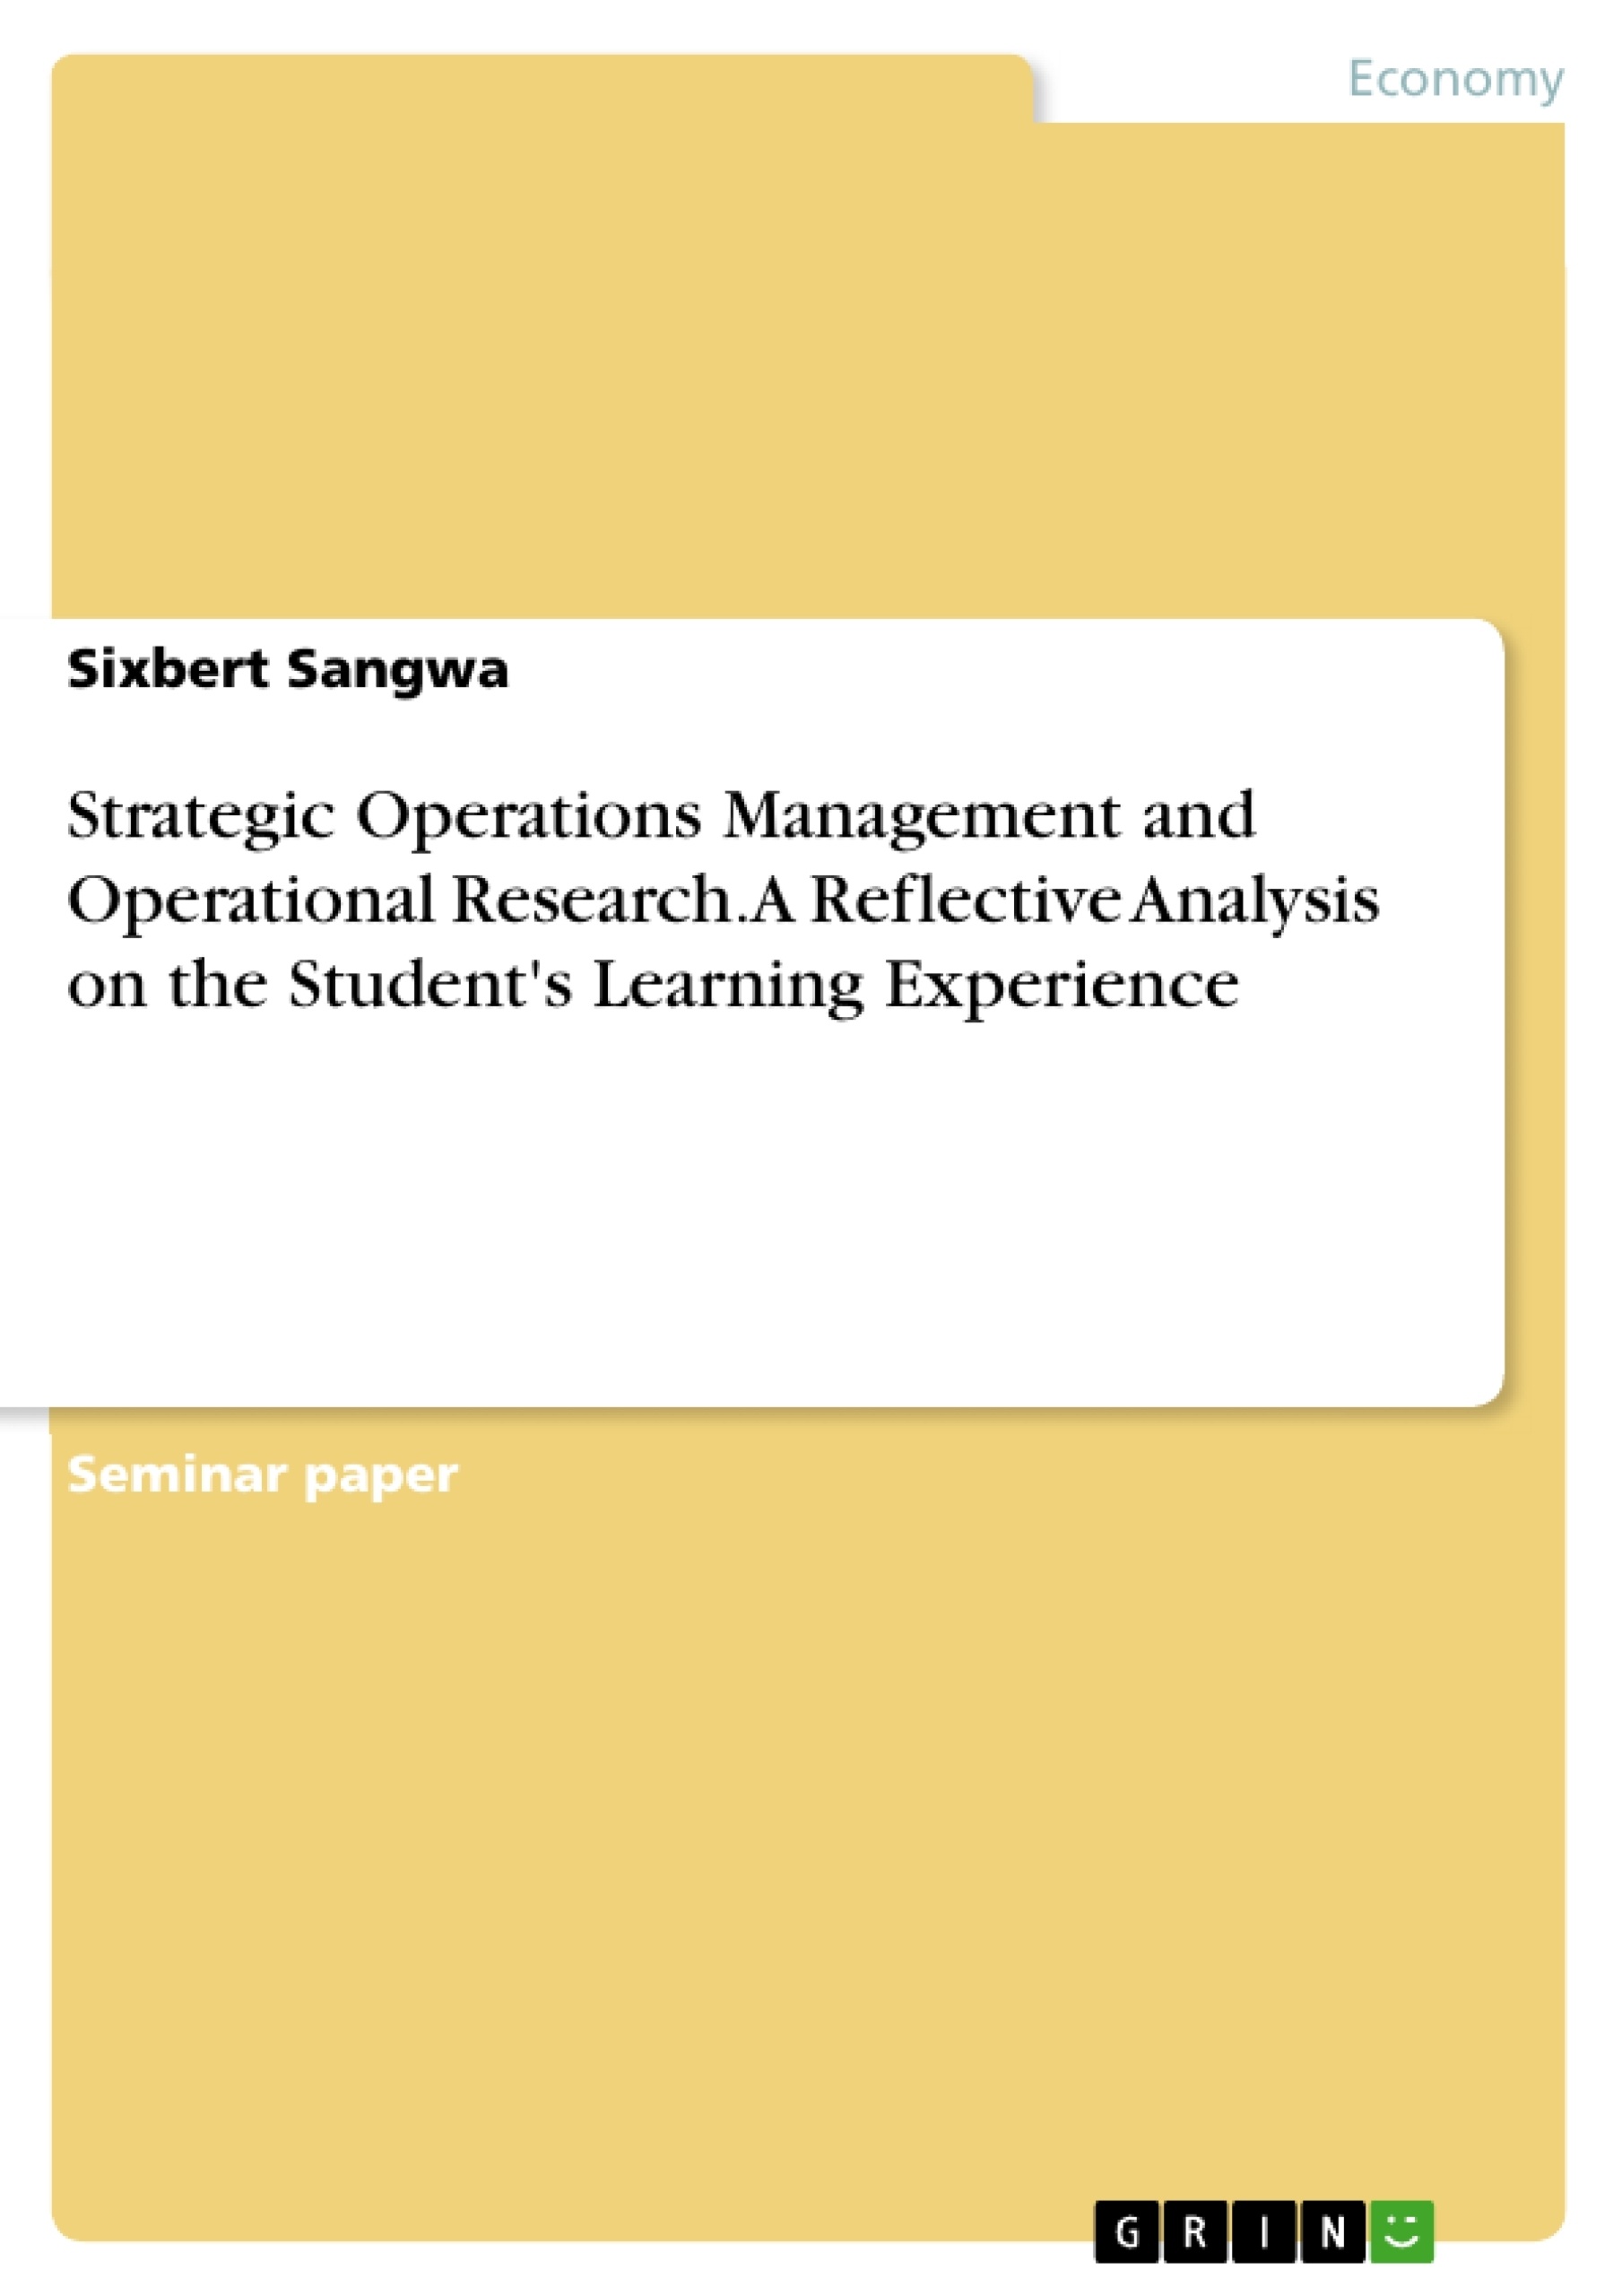 Title: Strategic Operations Management and Operational Research. A Reflective Analysis on the Student's Learning Experience